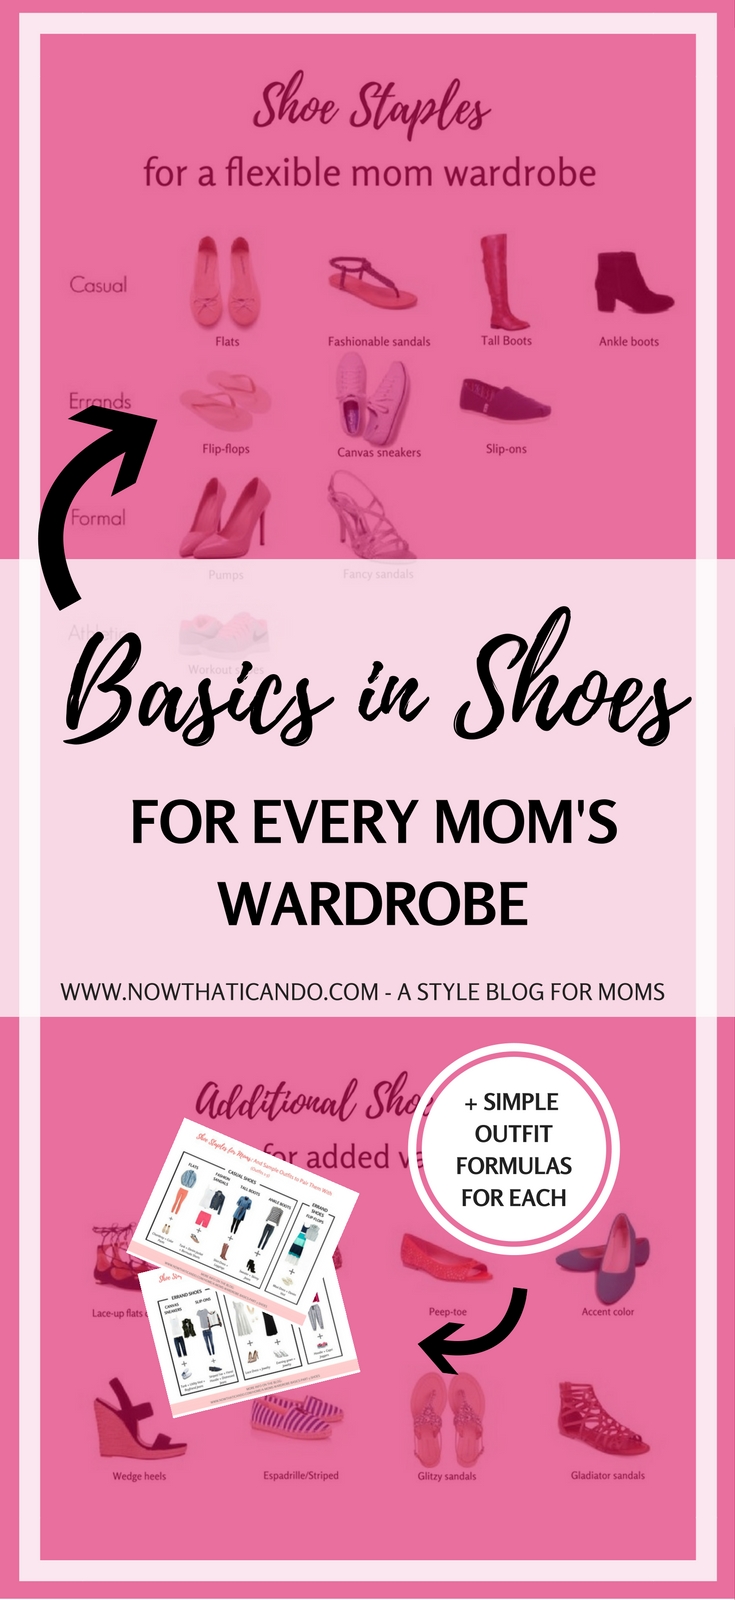 Ever frustrated by not having the right shoes to go with your outfits on a regular basis? Looking for some chic to add to your mom wardrobe without compromising comfort? This blogger breaks down the four basic categories of shoes moms should be looking for. Click through for the best comfortable and versatile shoes to own as a mom, and some inspiration for how to wear them in every day outfits.